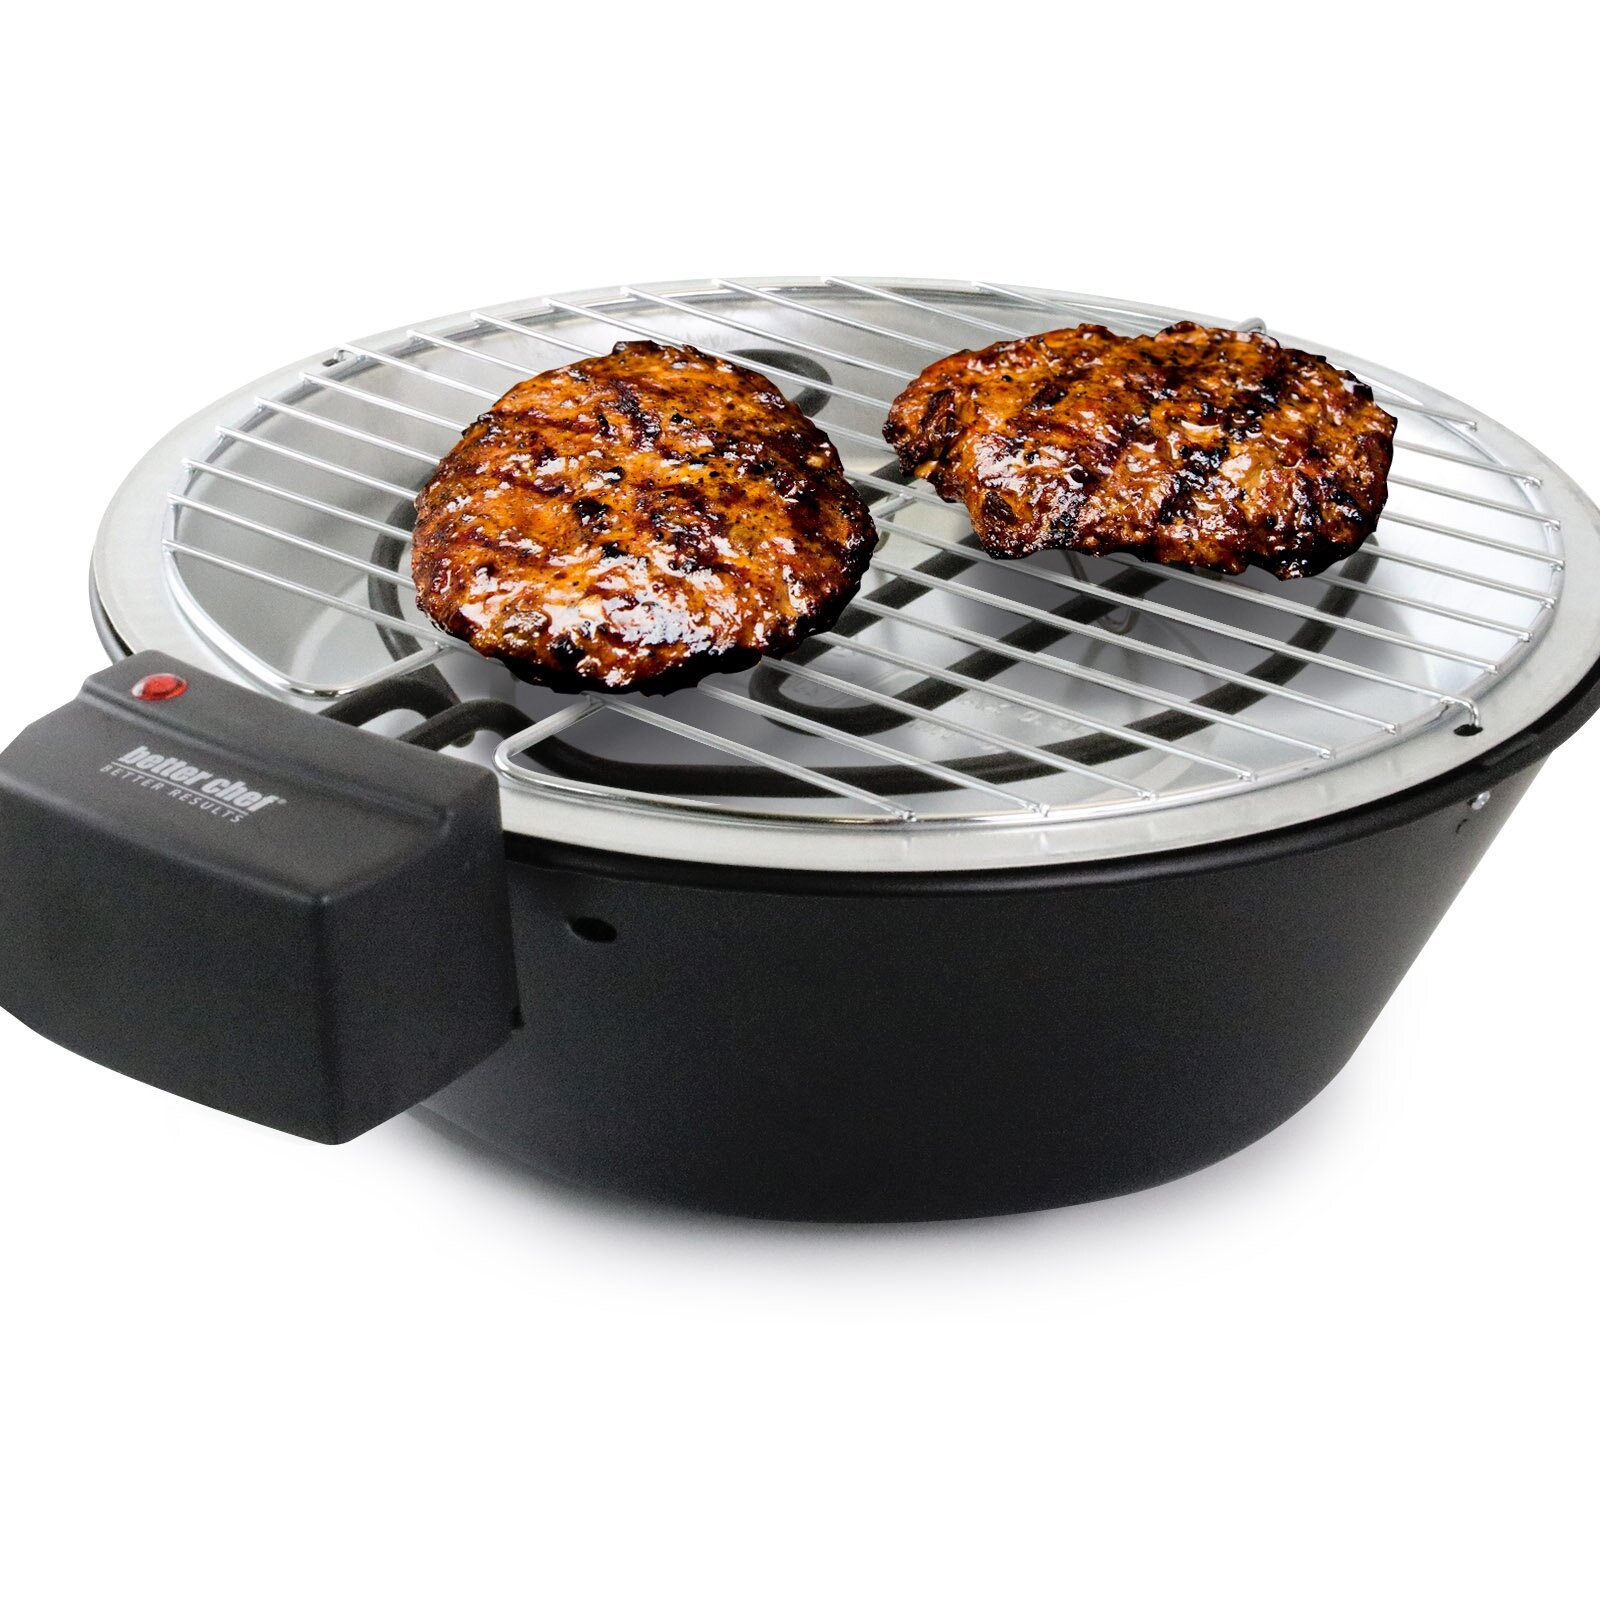 Chef Tested 3-In-1 Grill by Wards